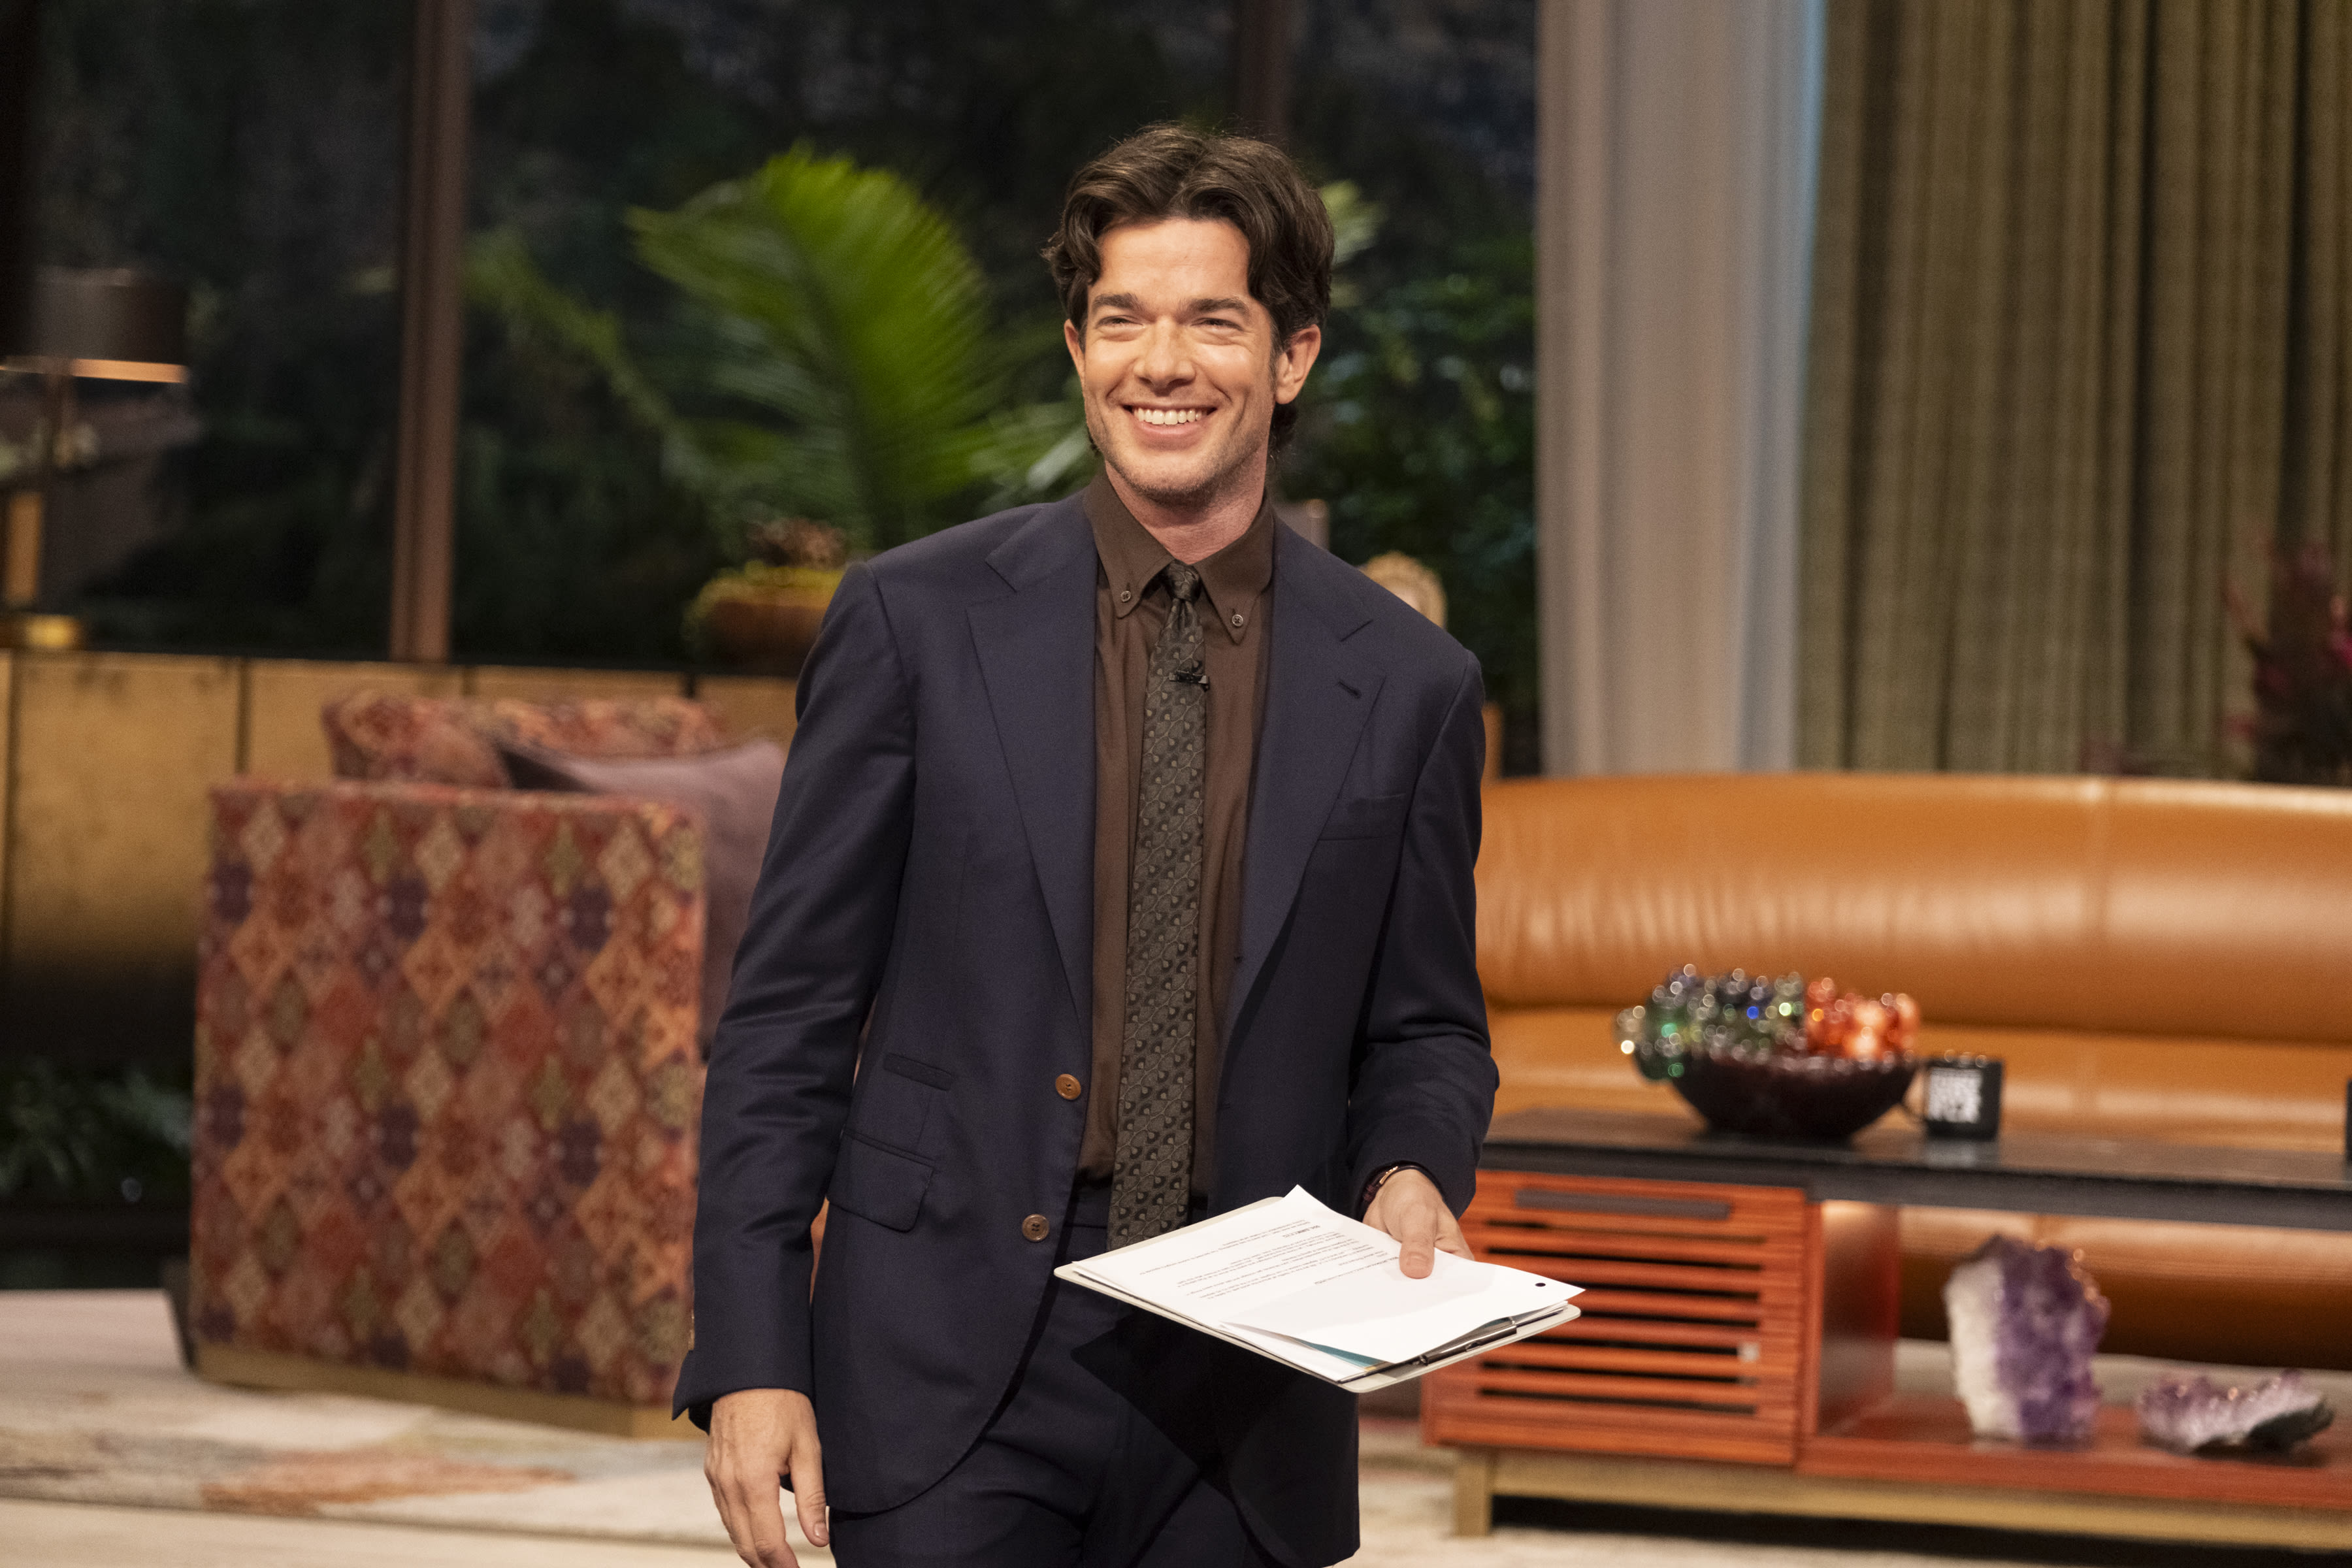 John Mulaney's 'Everybody's in L.A.': A guide to the hyperlocal references